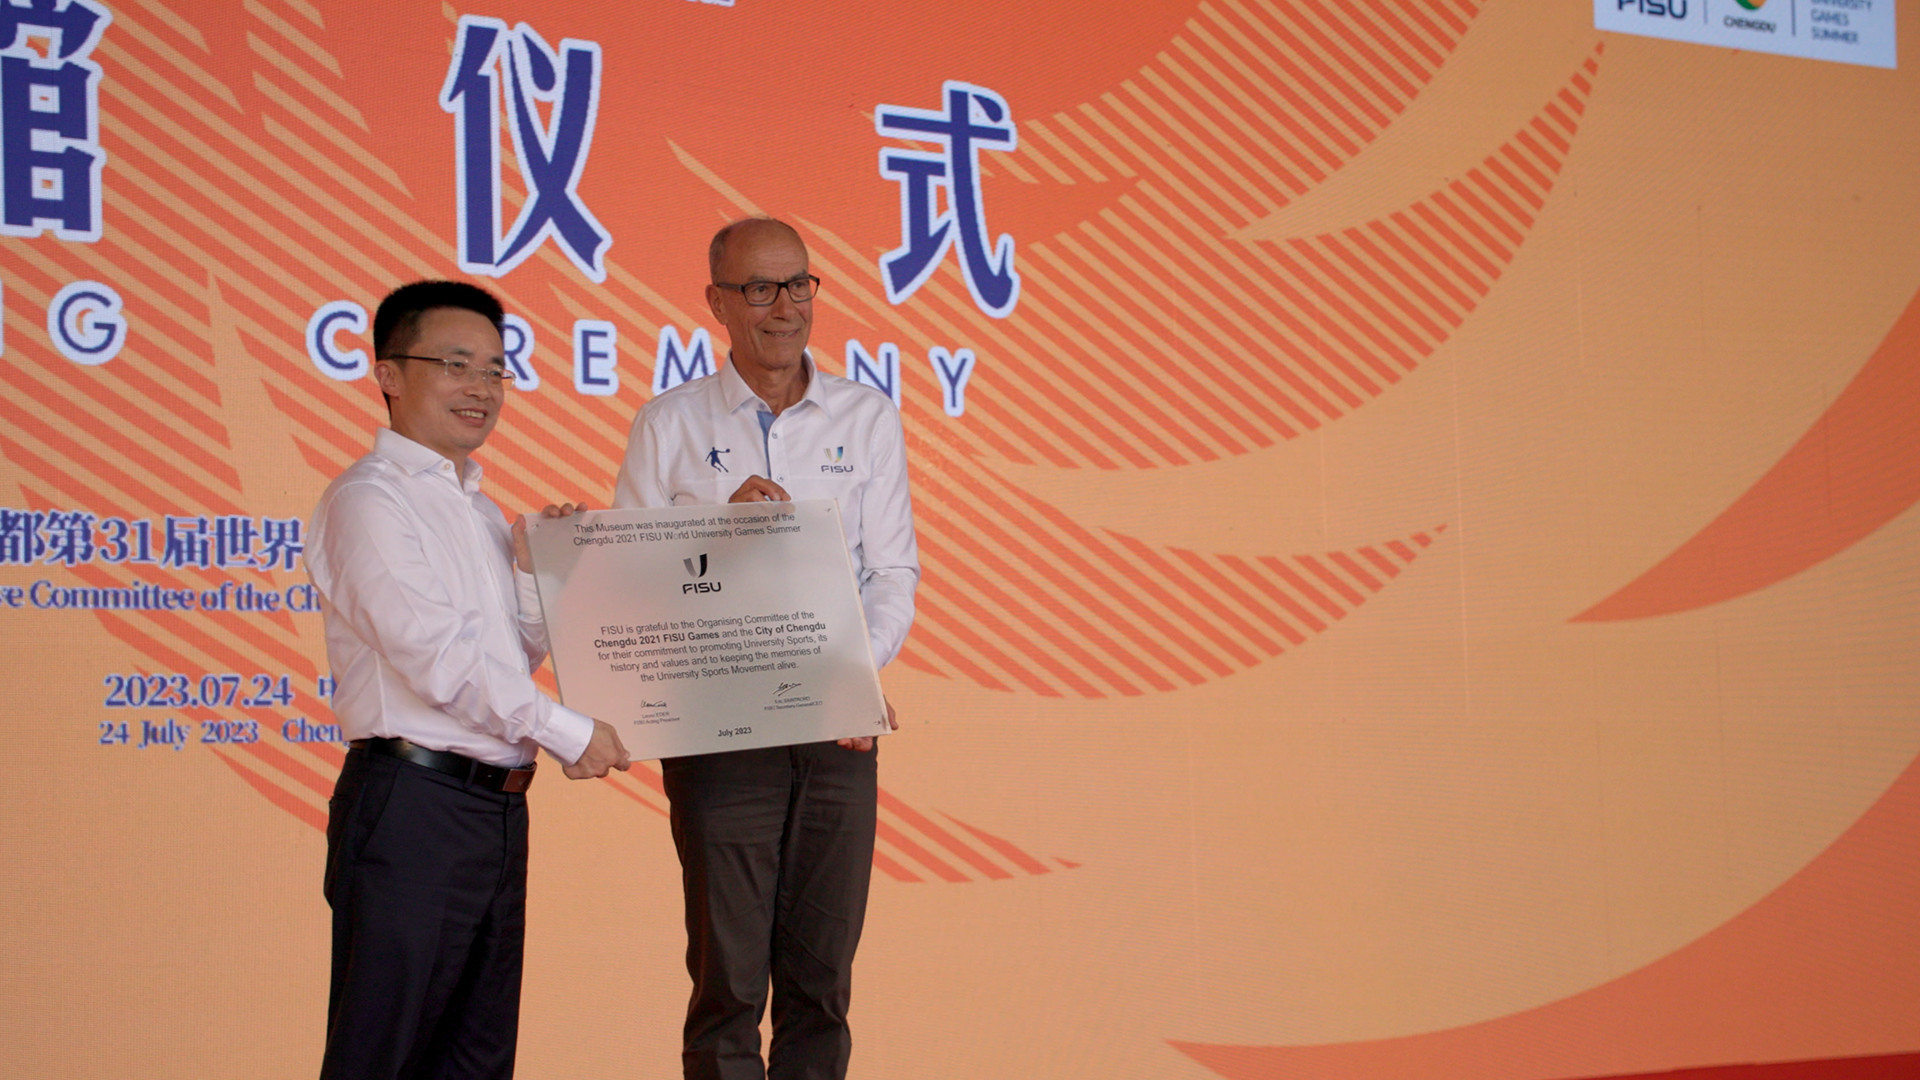 FISU Acting President Leonz Eder, right, presented a plaque for the Museum in Chengdu at its opening ©FISU